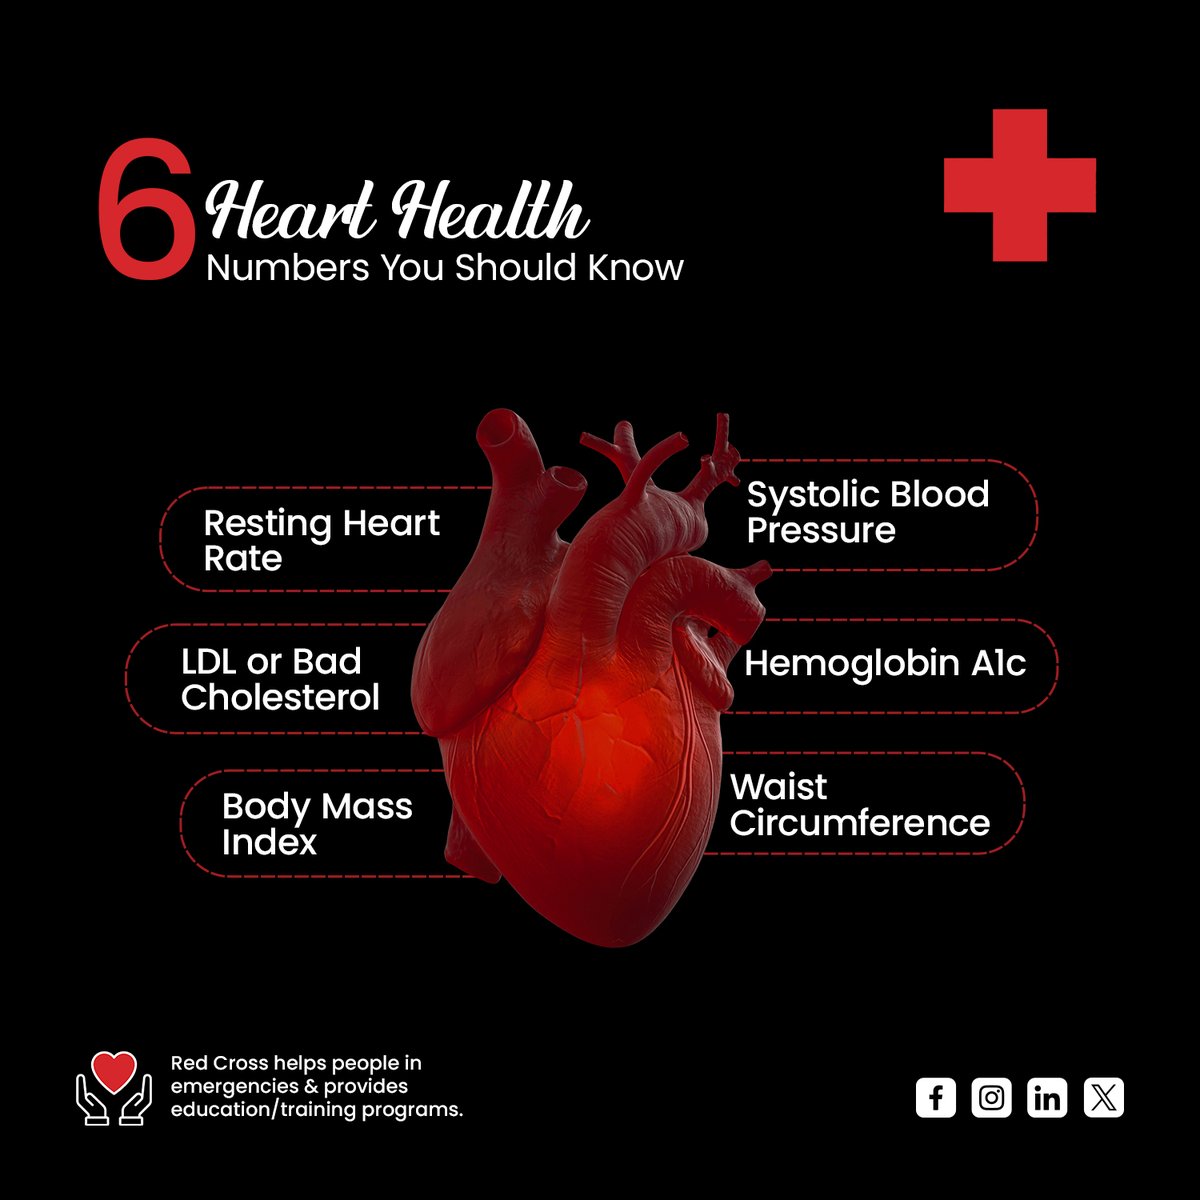 Stay informed, stay healthy! 

Get to know the 6 Heart Health Numbers

Visit us via @ircstnbranch bio to know more.

#redcross #HeartHealth #HealthyHeart #HeartCare #LoveYourHeart #HeartDisease #PreventHeartDisease #HealthyLifestyle #HeartAwareness #HeartSmart #BeatHeartDisease